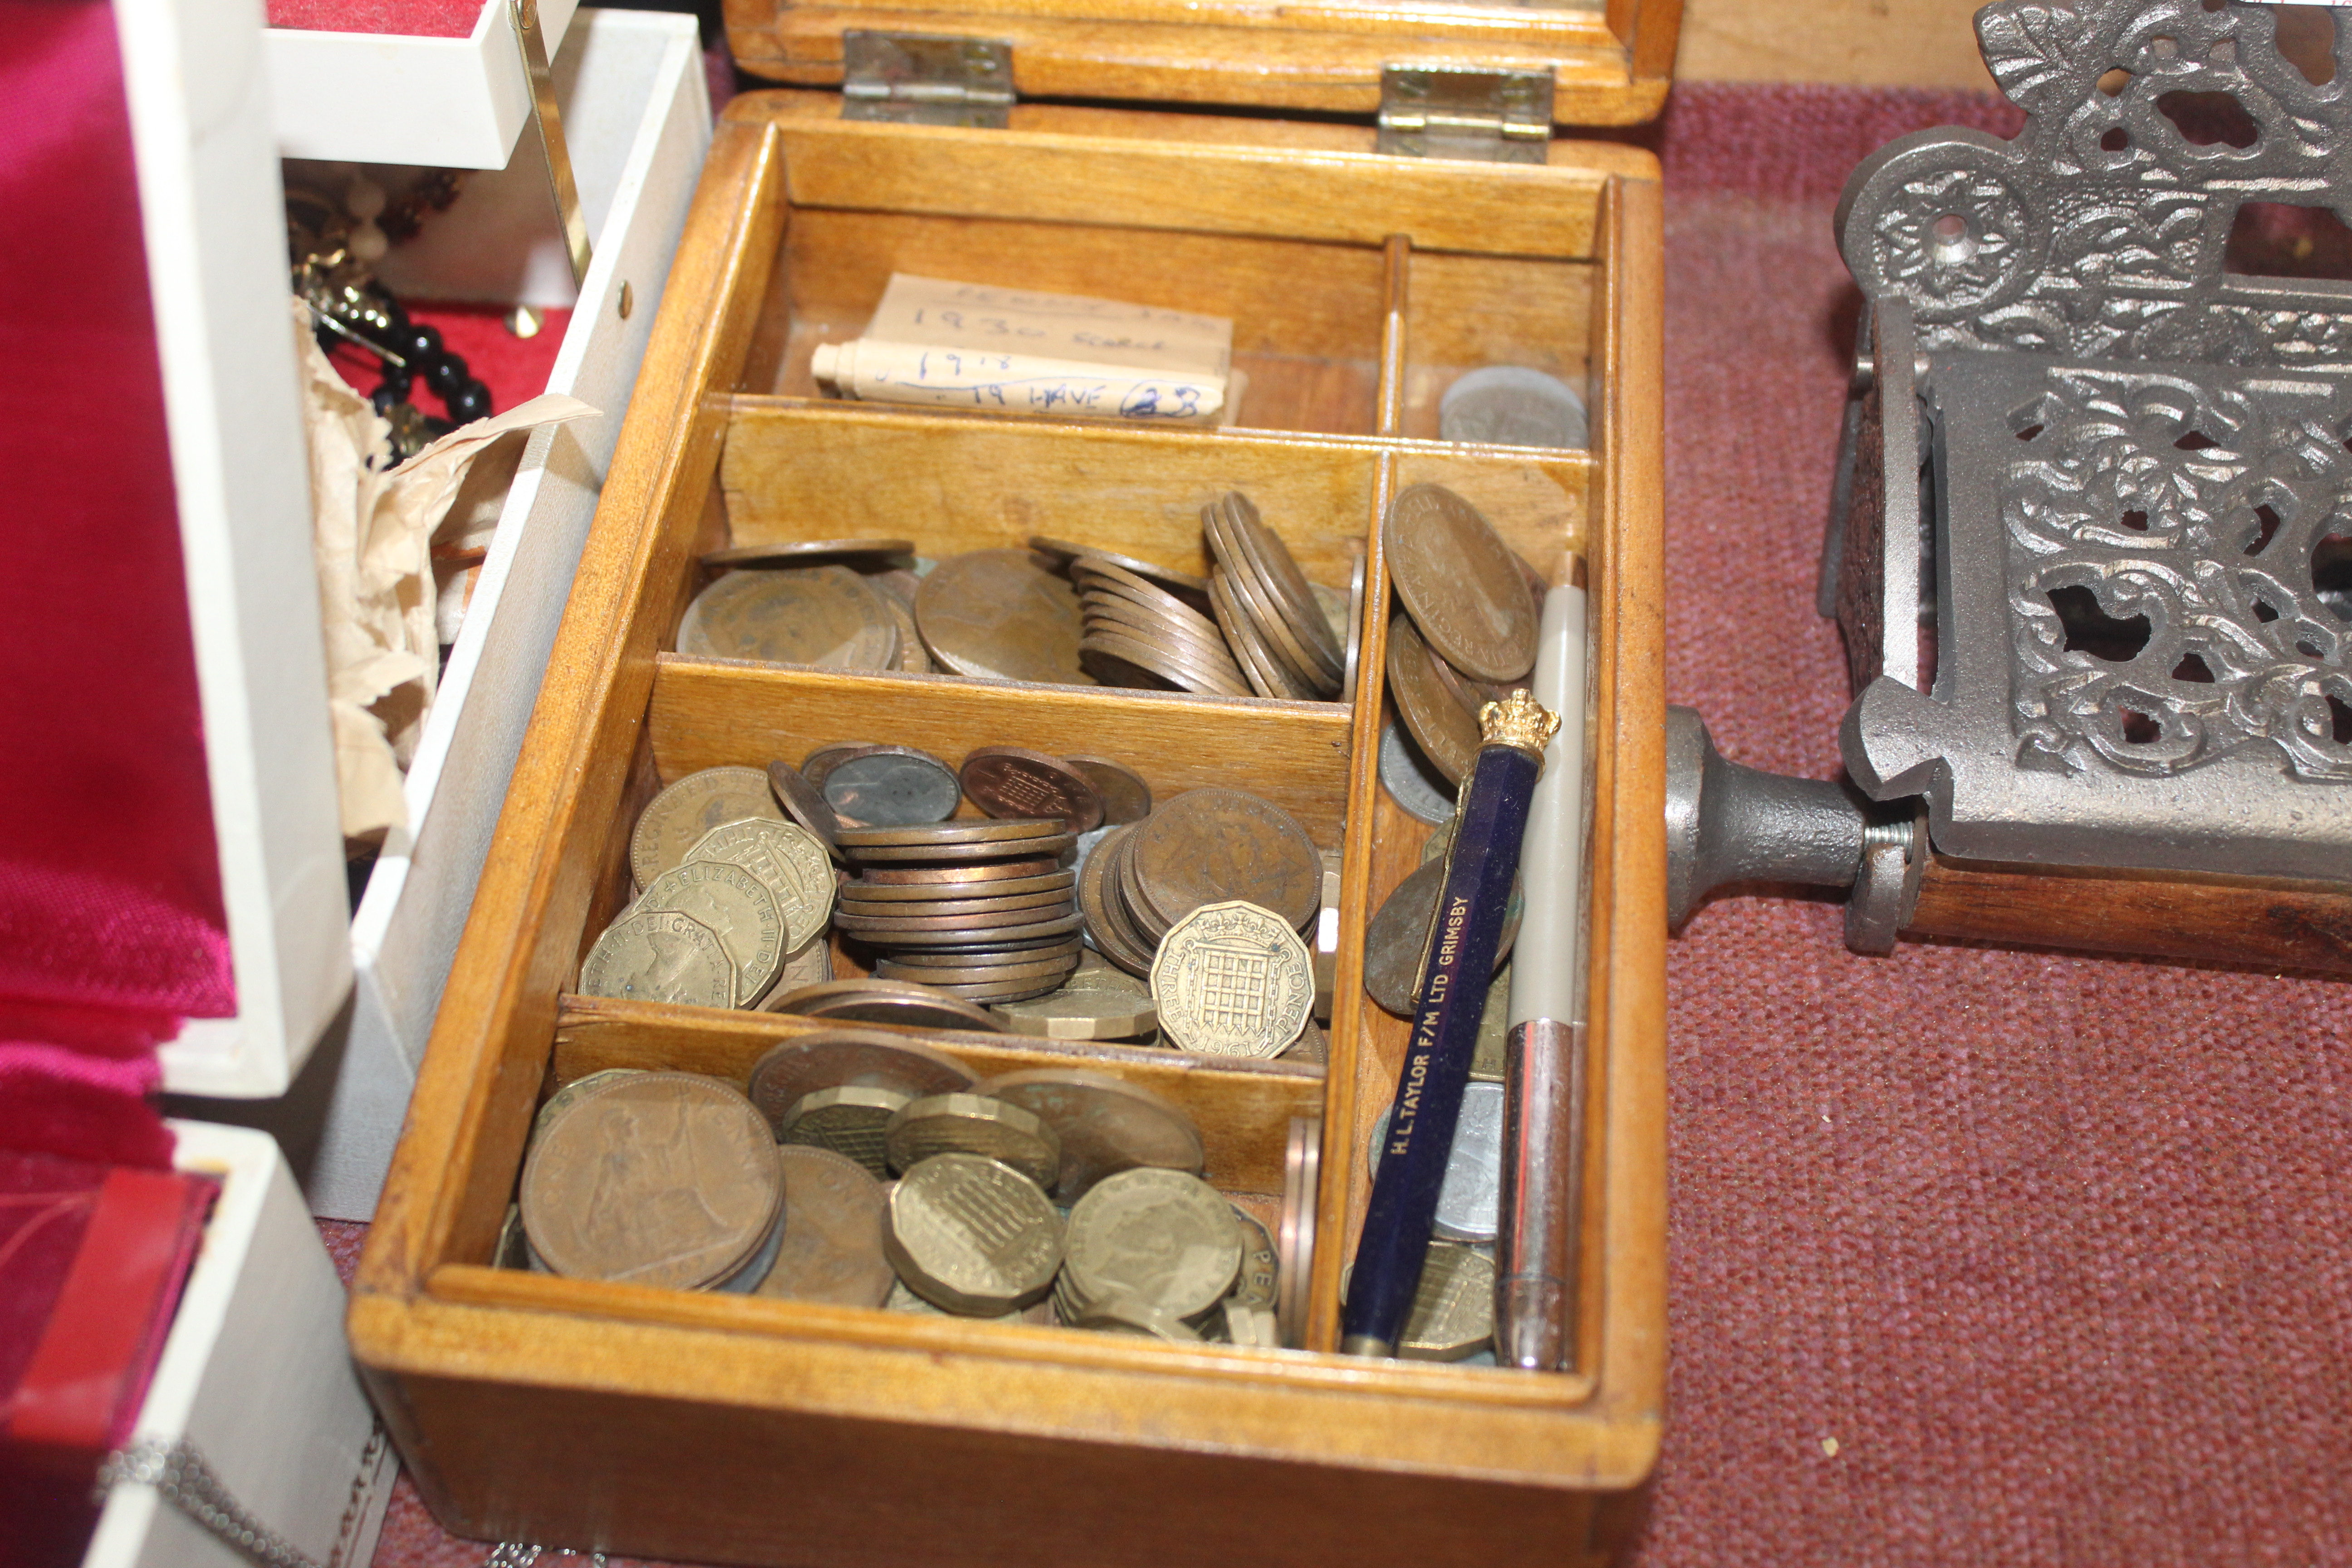 A wooden box with contents of various coins